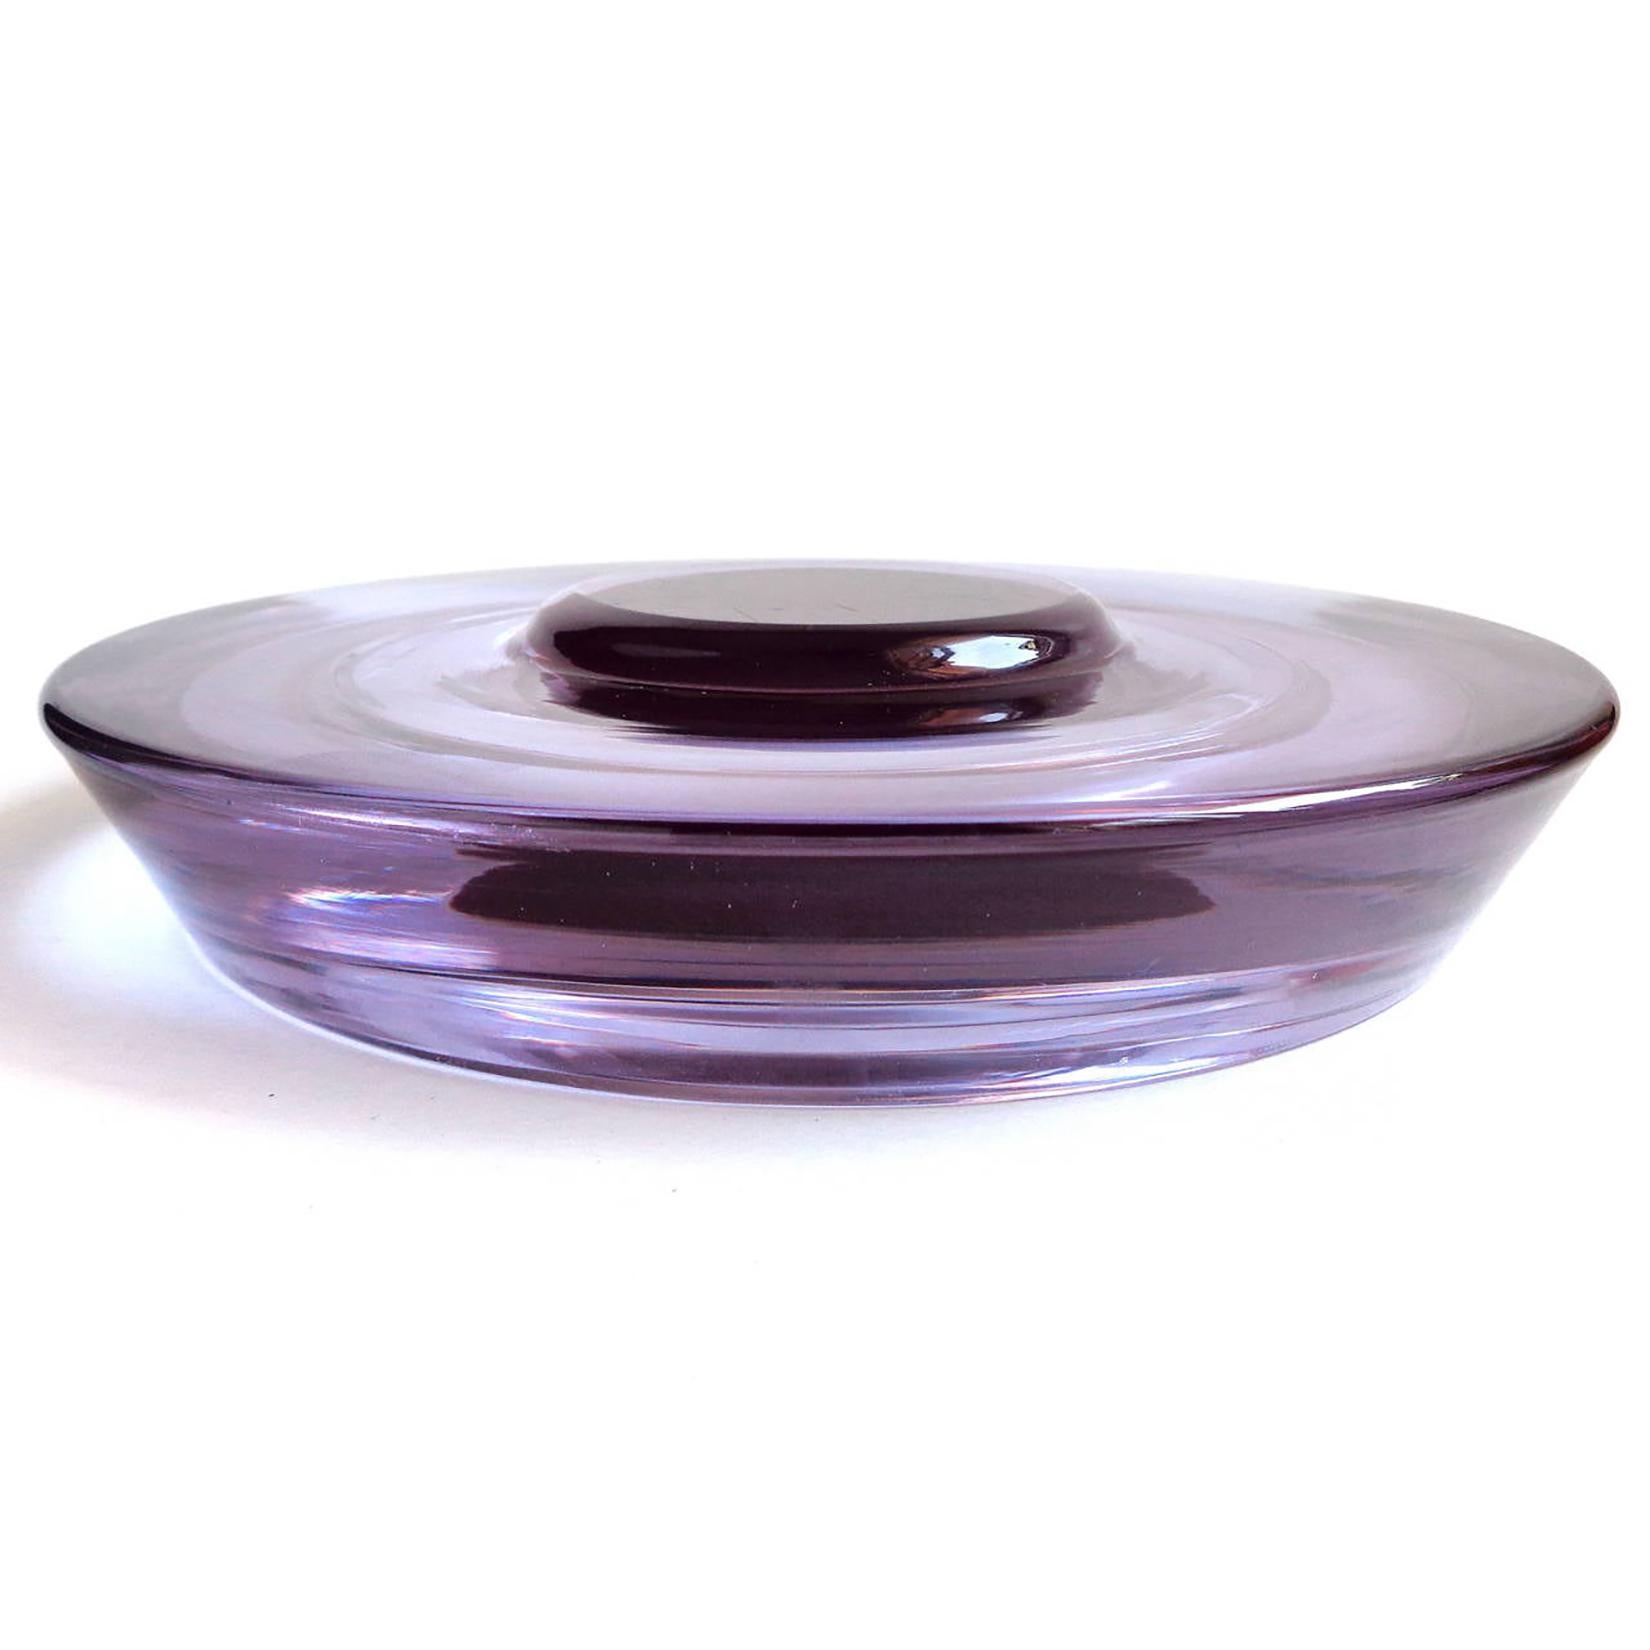 Hand-Crafted Murano Sommerso Purple Alexandrite Red Italian Art Glass Hovering UFO Bowl